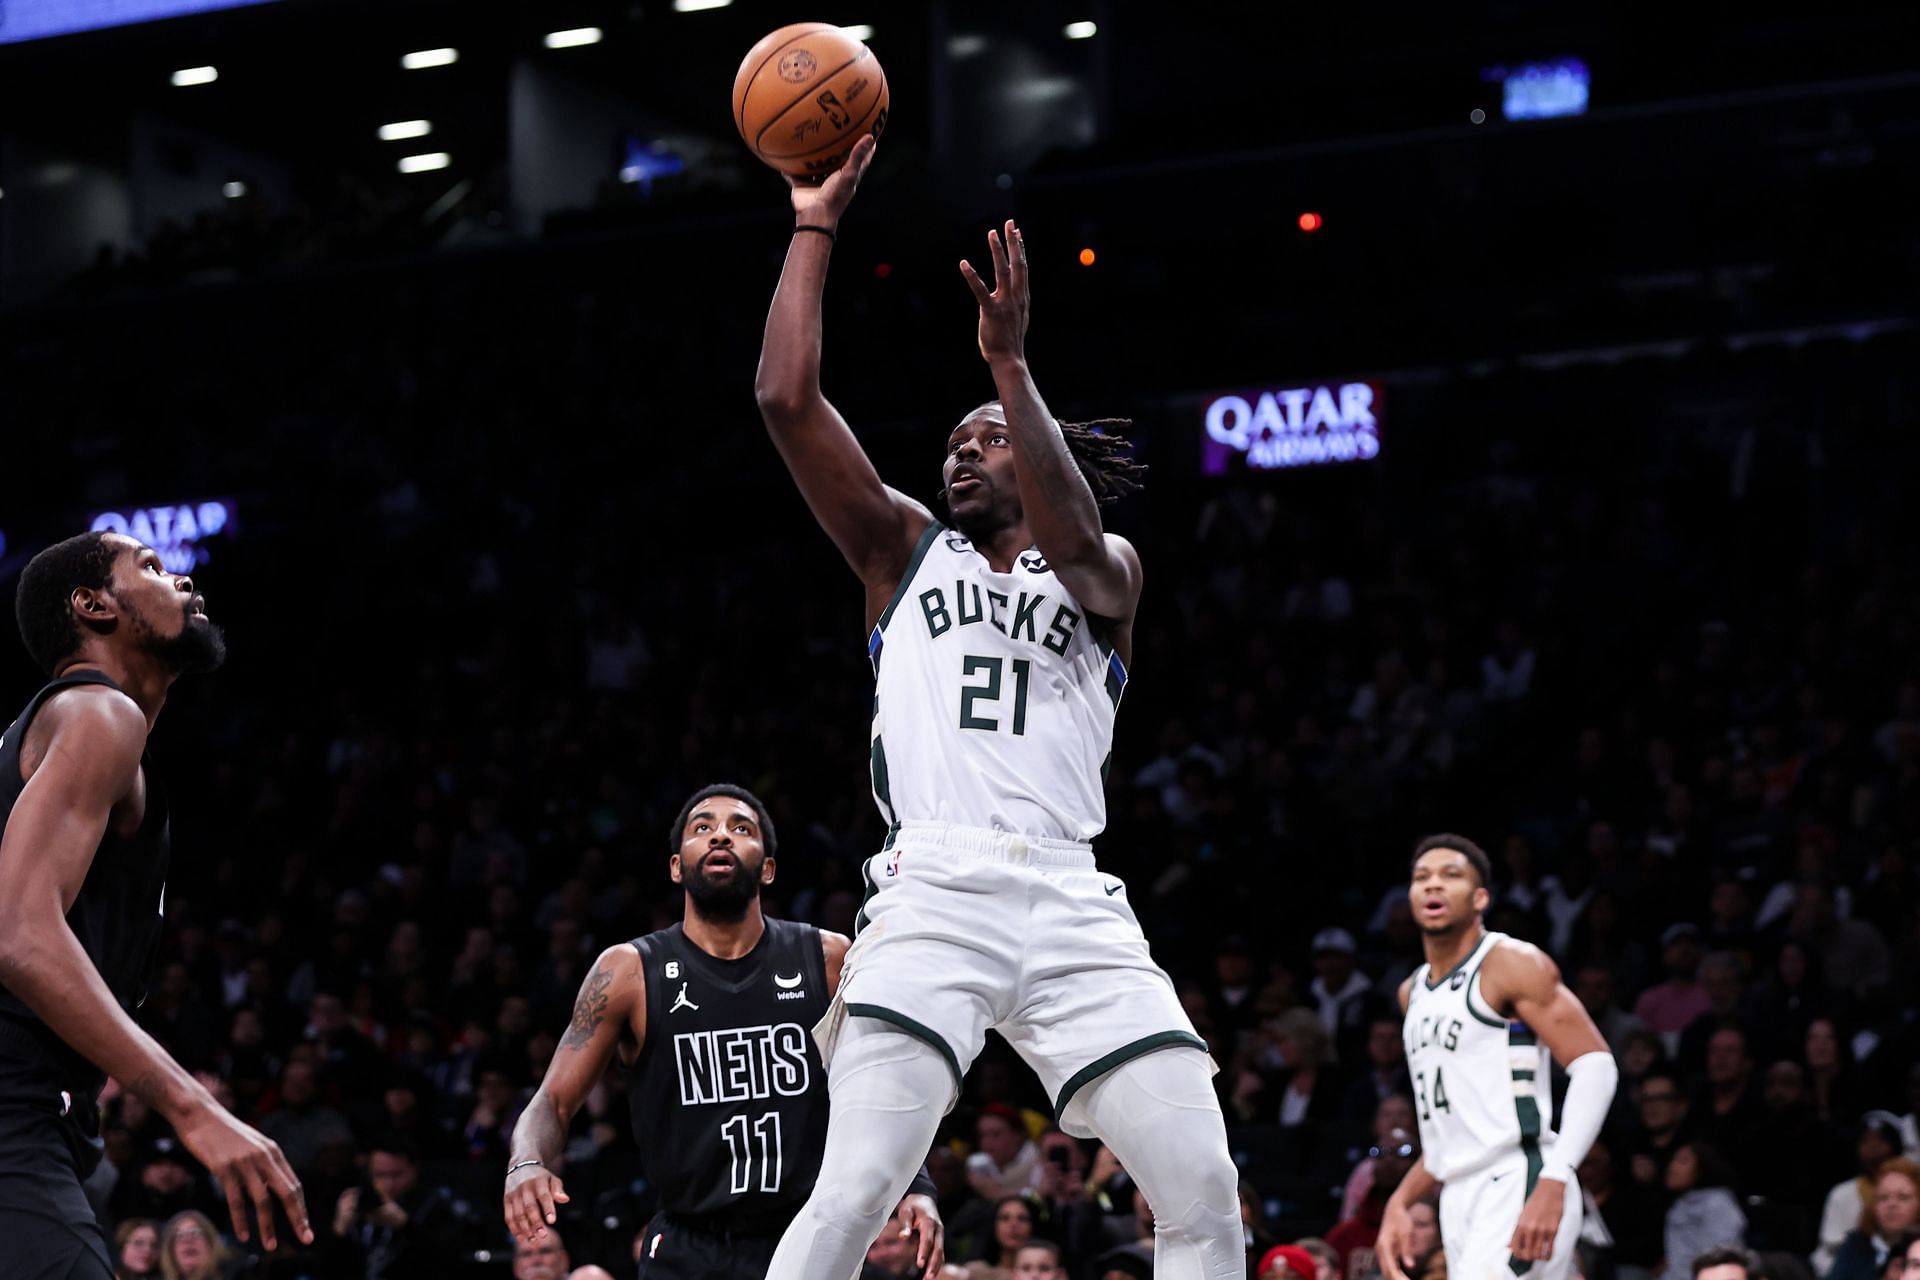 Former NBA All-Star Jrue Holiday could return from a three-game absence tonight for the Milwaukee Bucks.